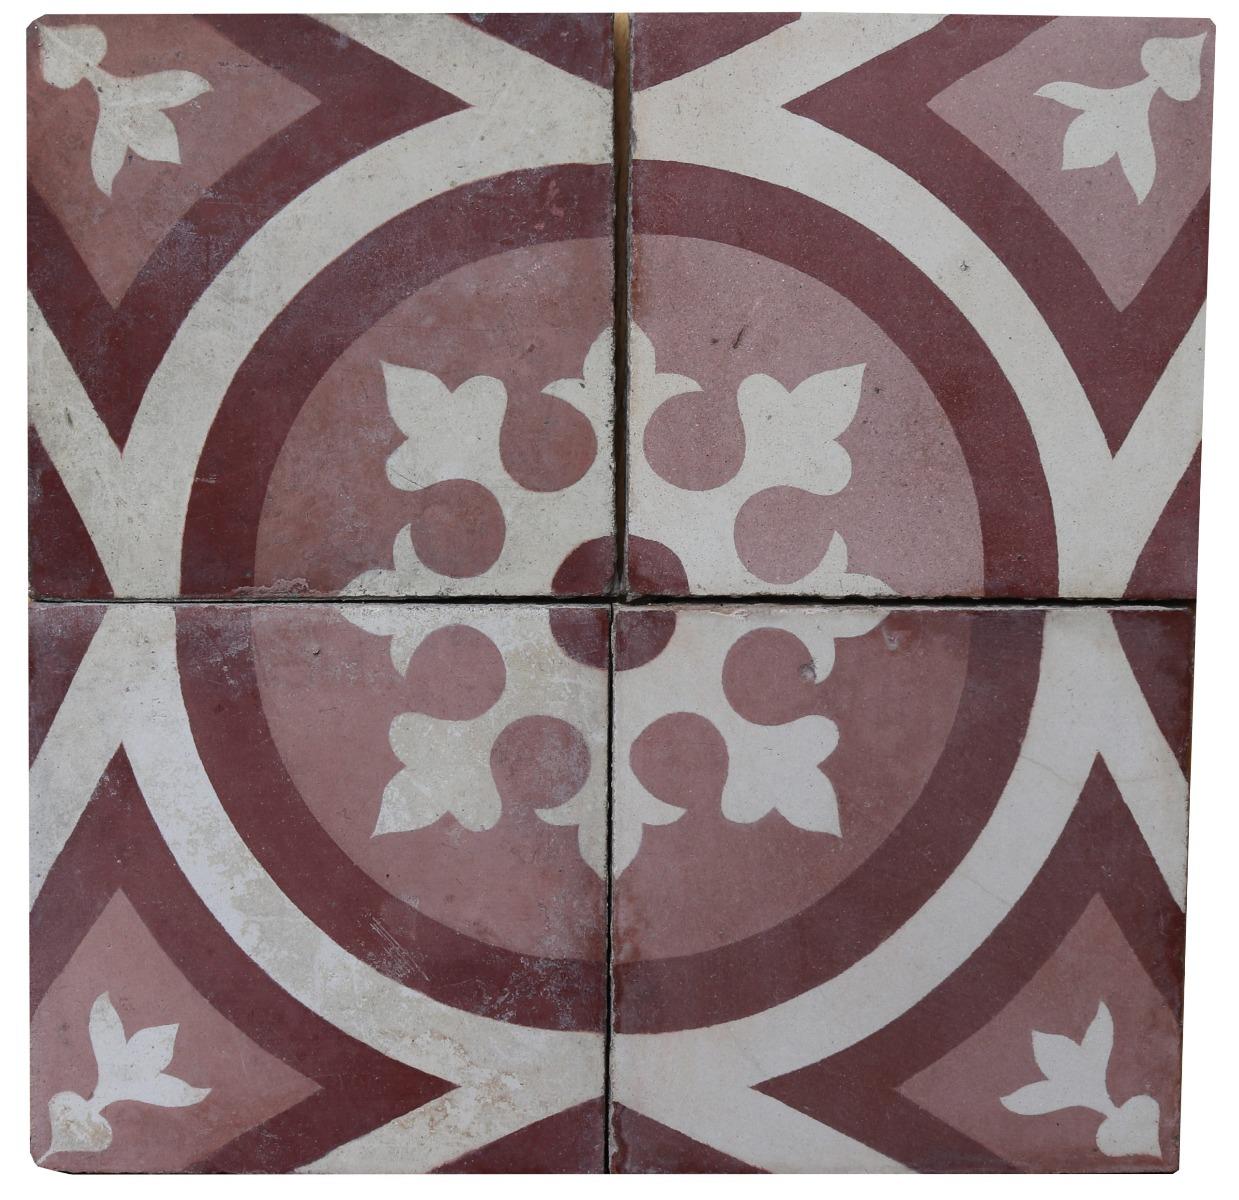 A batch of 60 reclaimed encaustic cement floor tiles. These tiles will cover 2.4 m2 or 25 ft2.